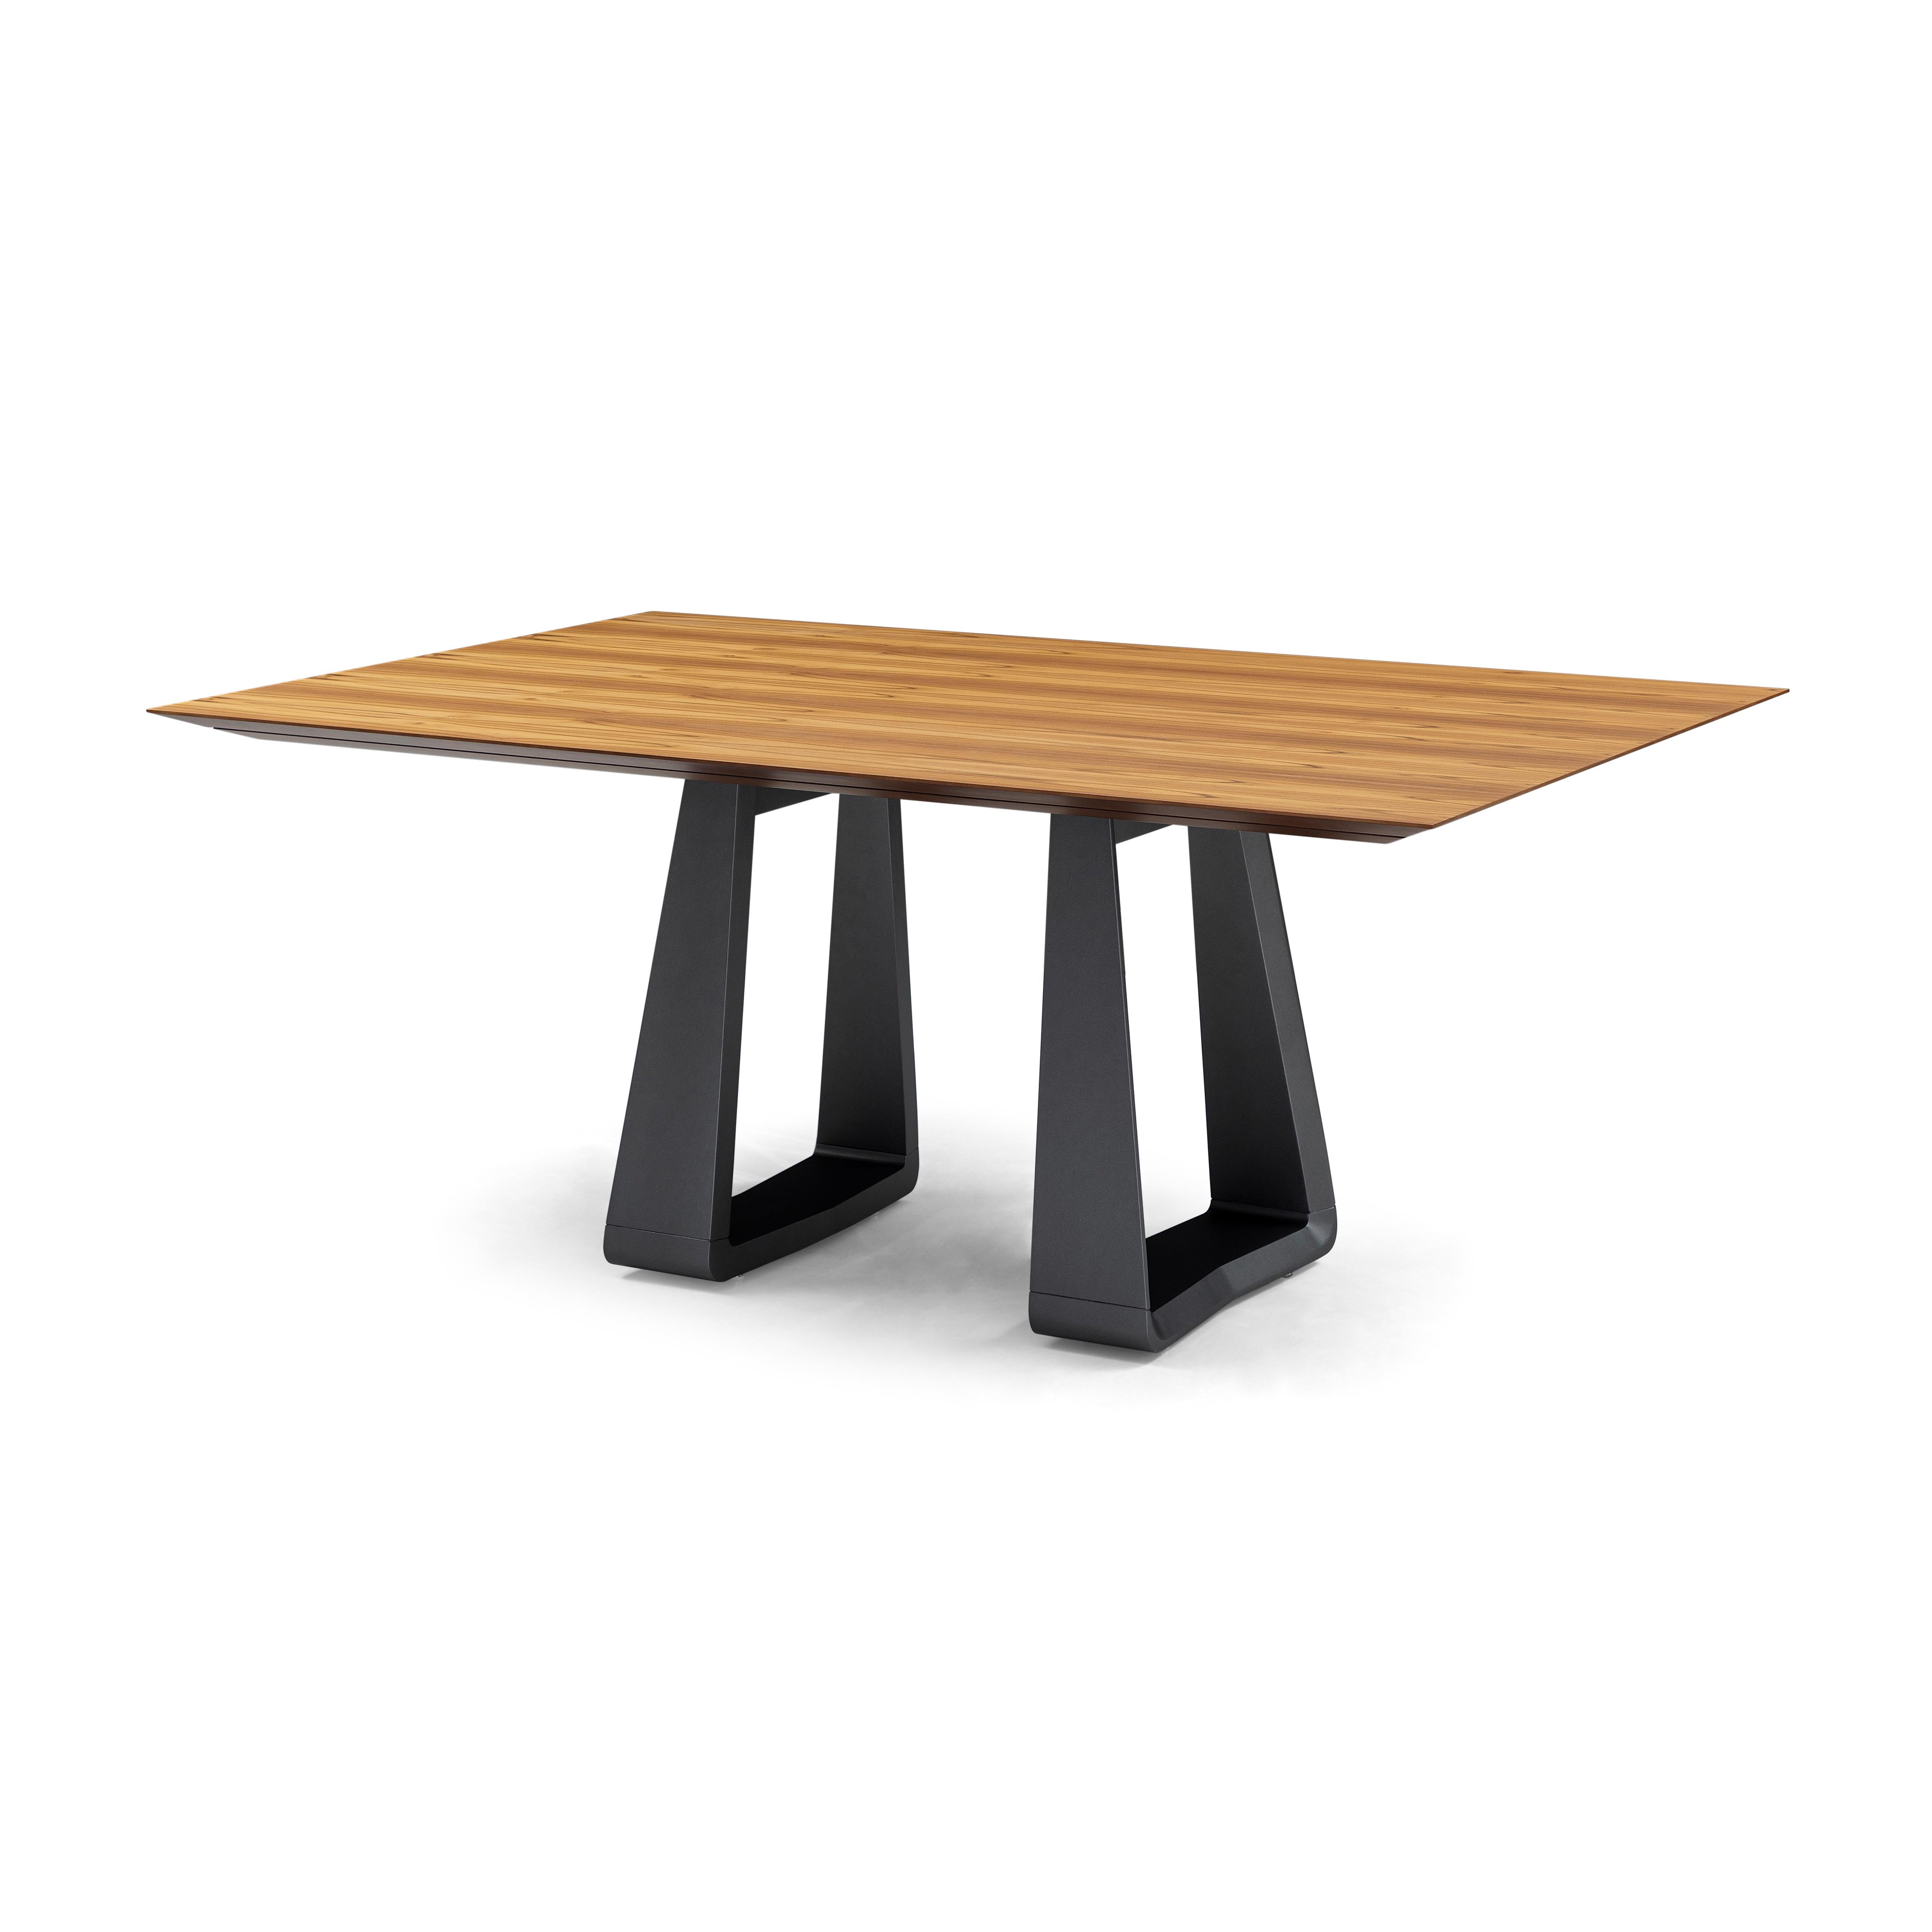 The Wing dining table is a beautiful chamfered piece in a teak veneered table top and a minimalist graphite base. Combining all these details the amazing Uultis team has created this dining table for any type of decor at your home because of its